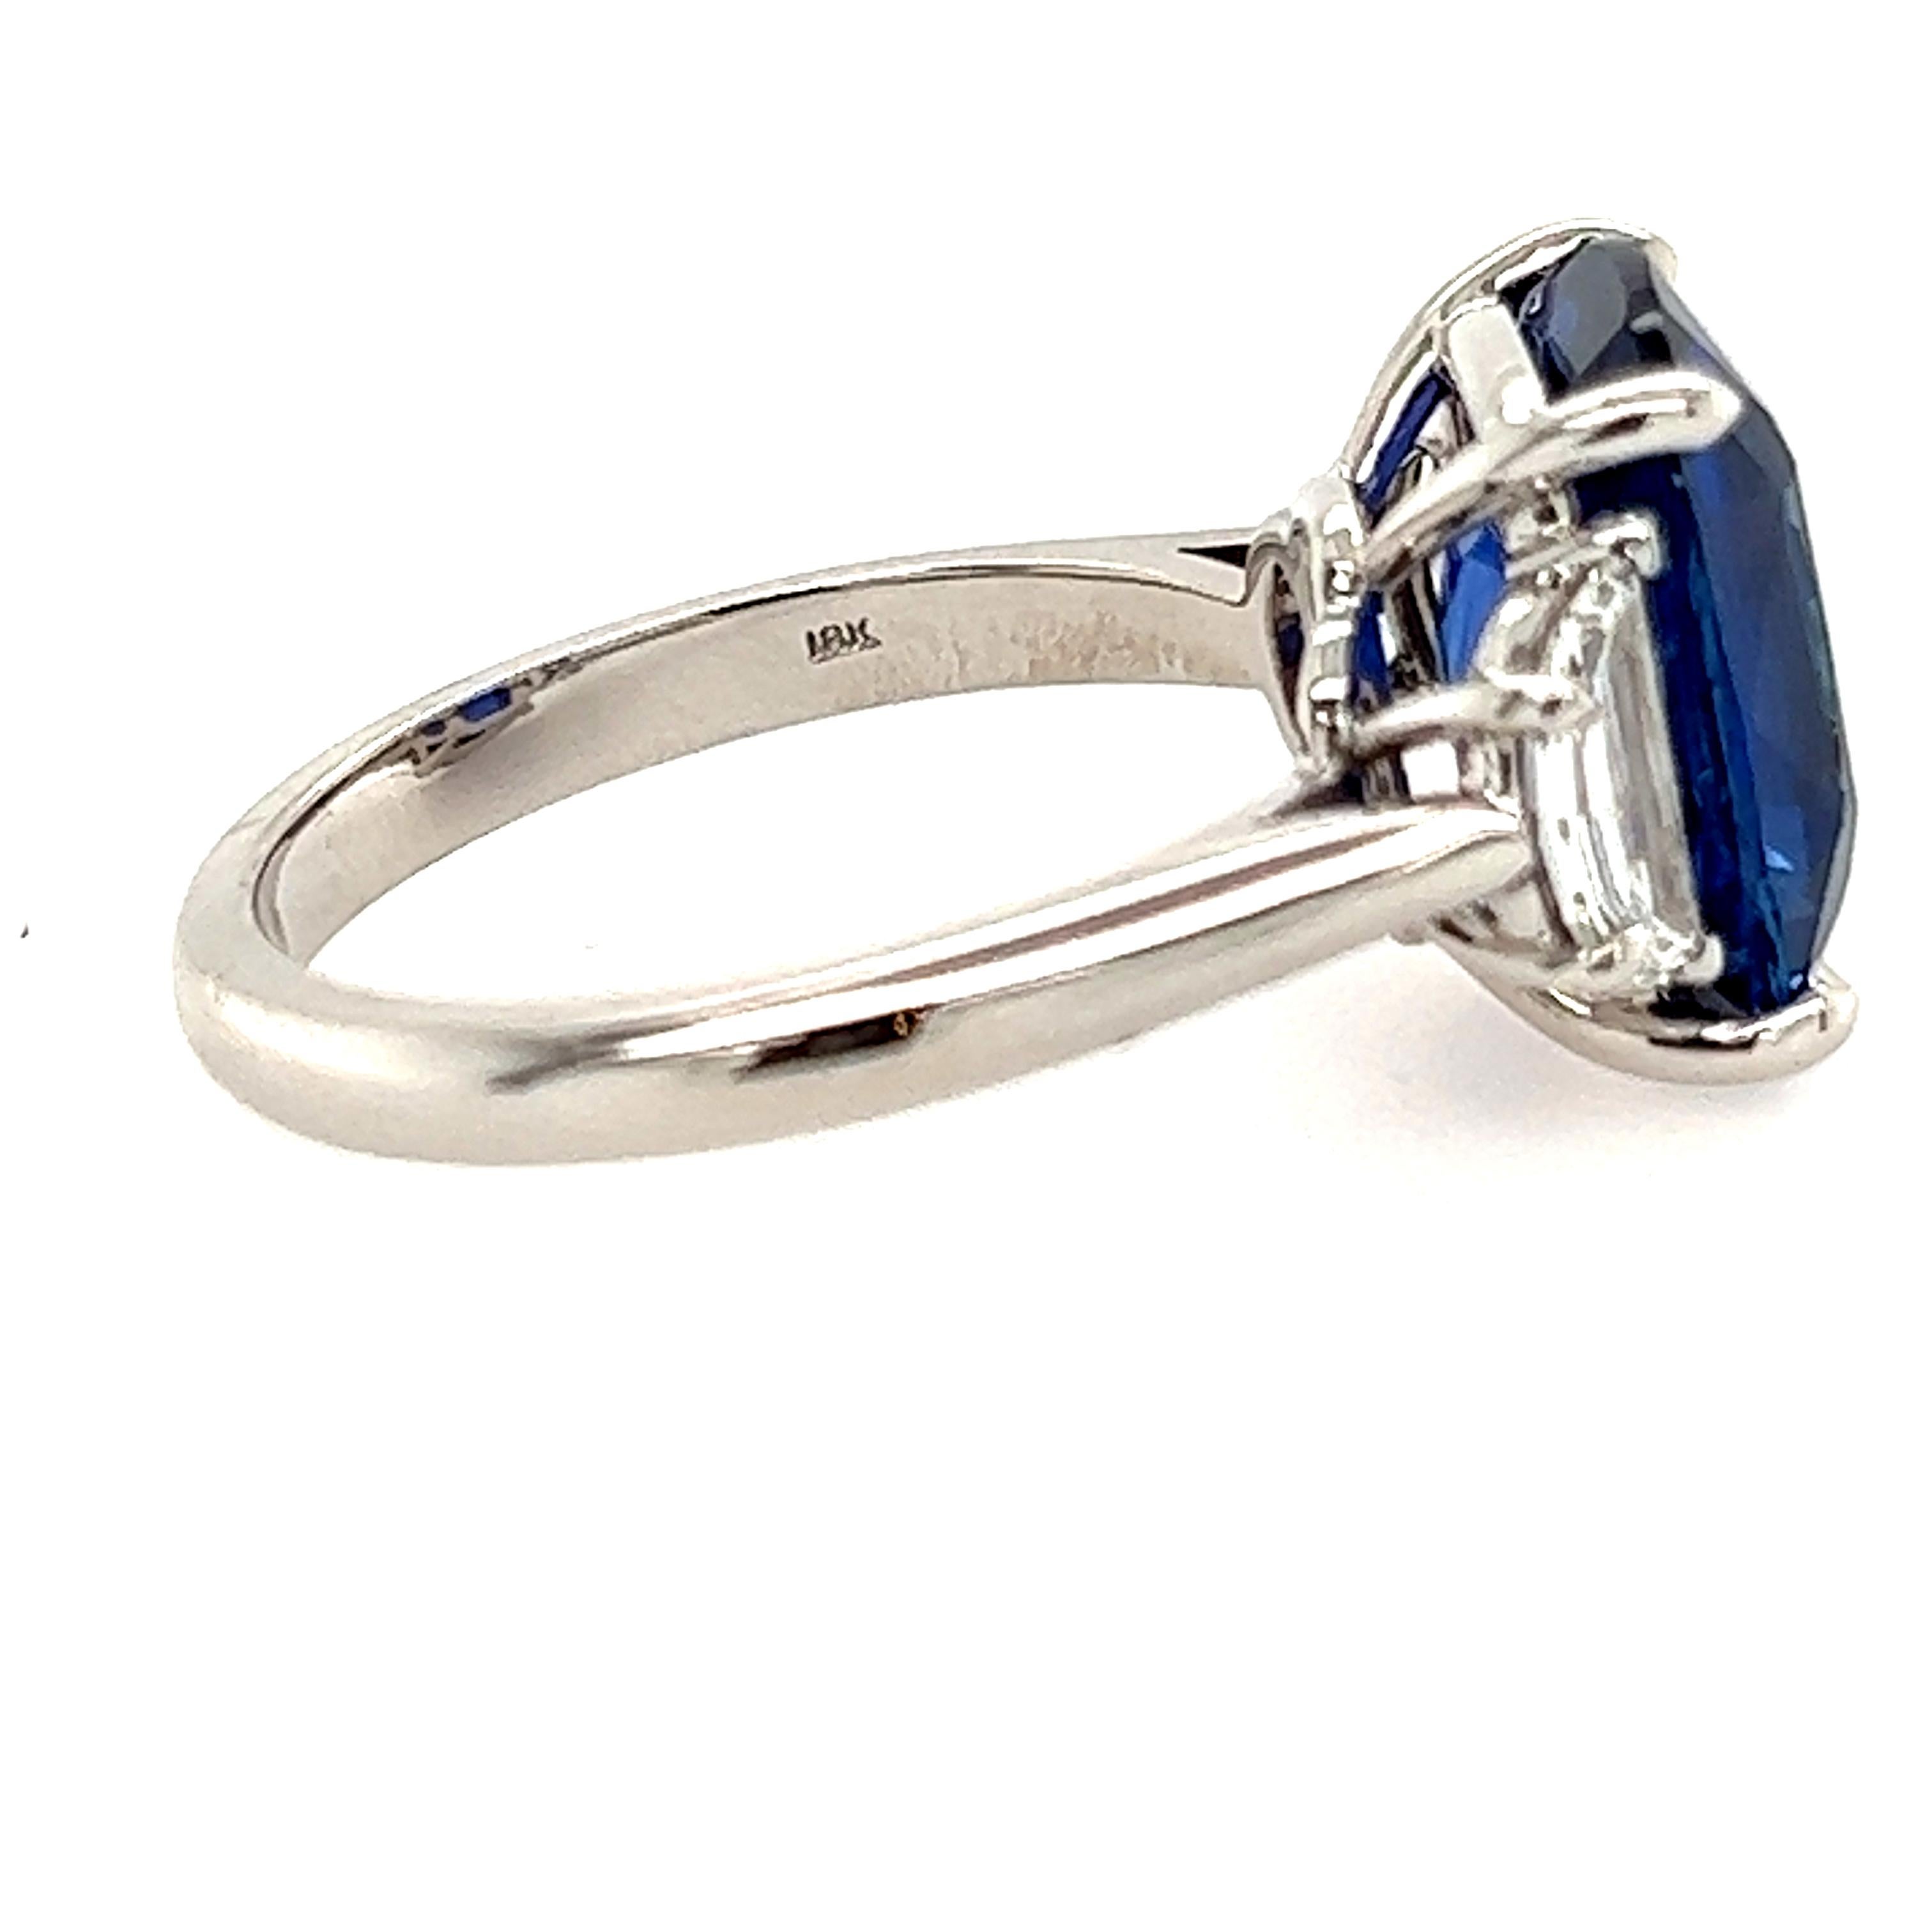 Here is a truly magnificent ring that is sure to take your breath away. This stunning piece features a mesmerizing 6.94-carat blue sapphire, GIA certified Ceylon, that is set in an elegant 18k white gold mounting. The sapphire's rich, medium-blue